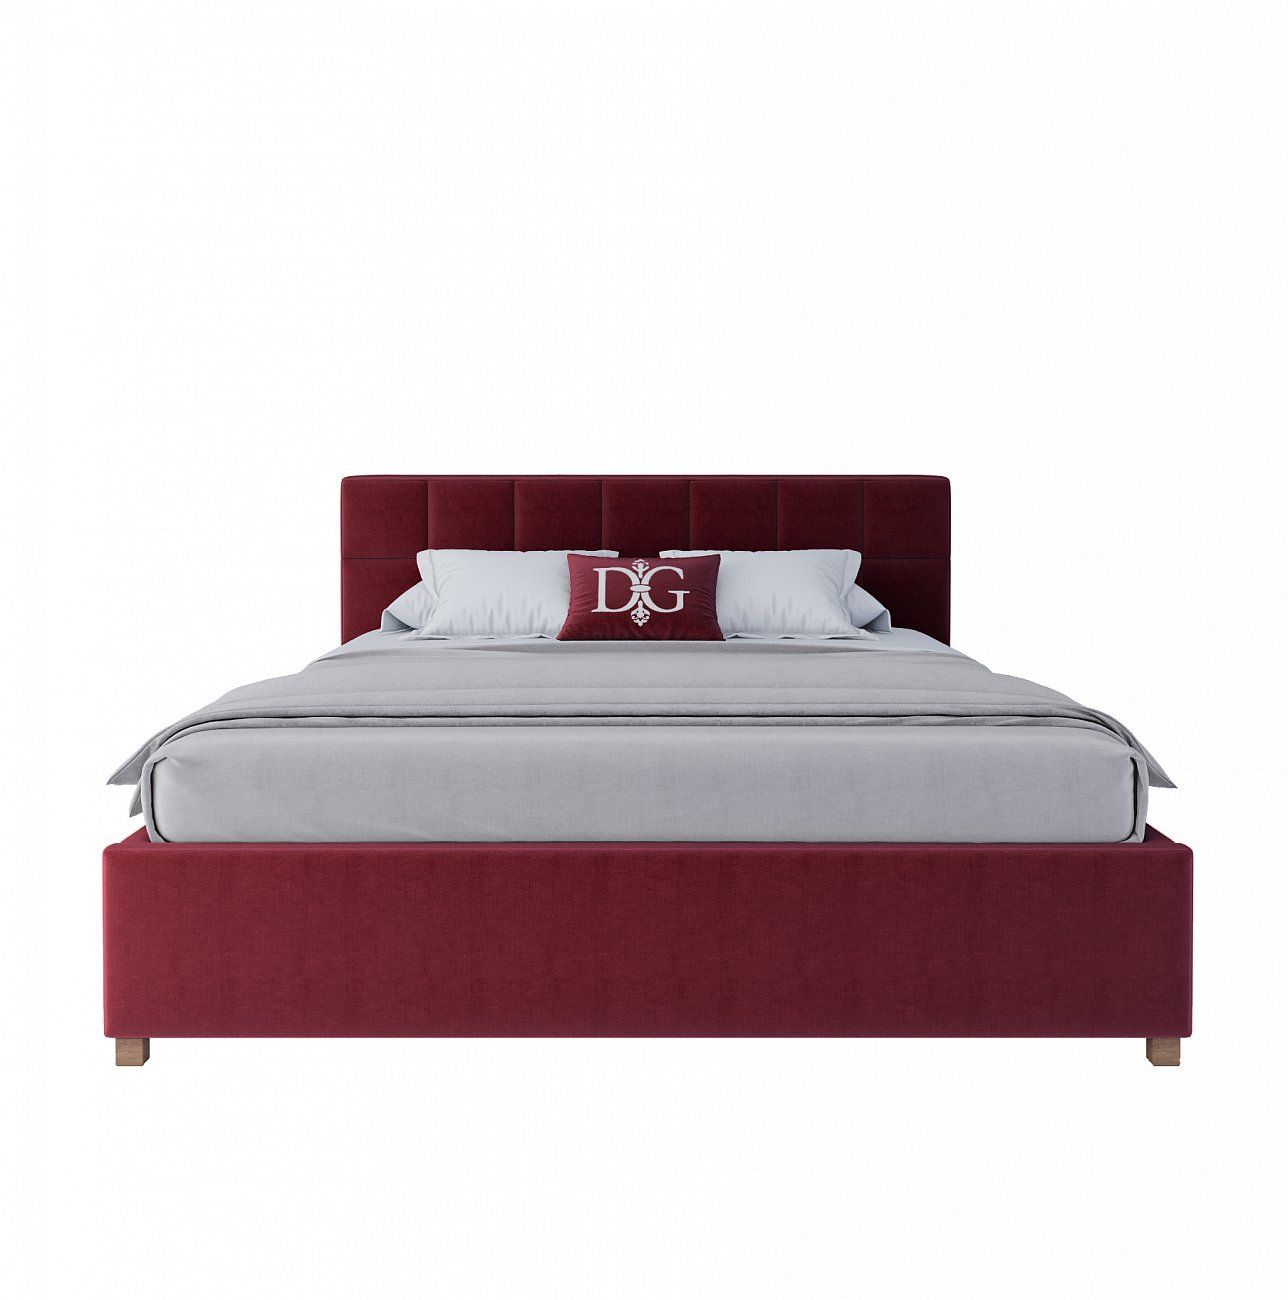 Double bed with upholstered headboard 160x200 cm red Wales